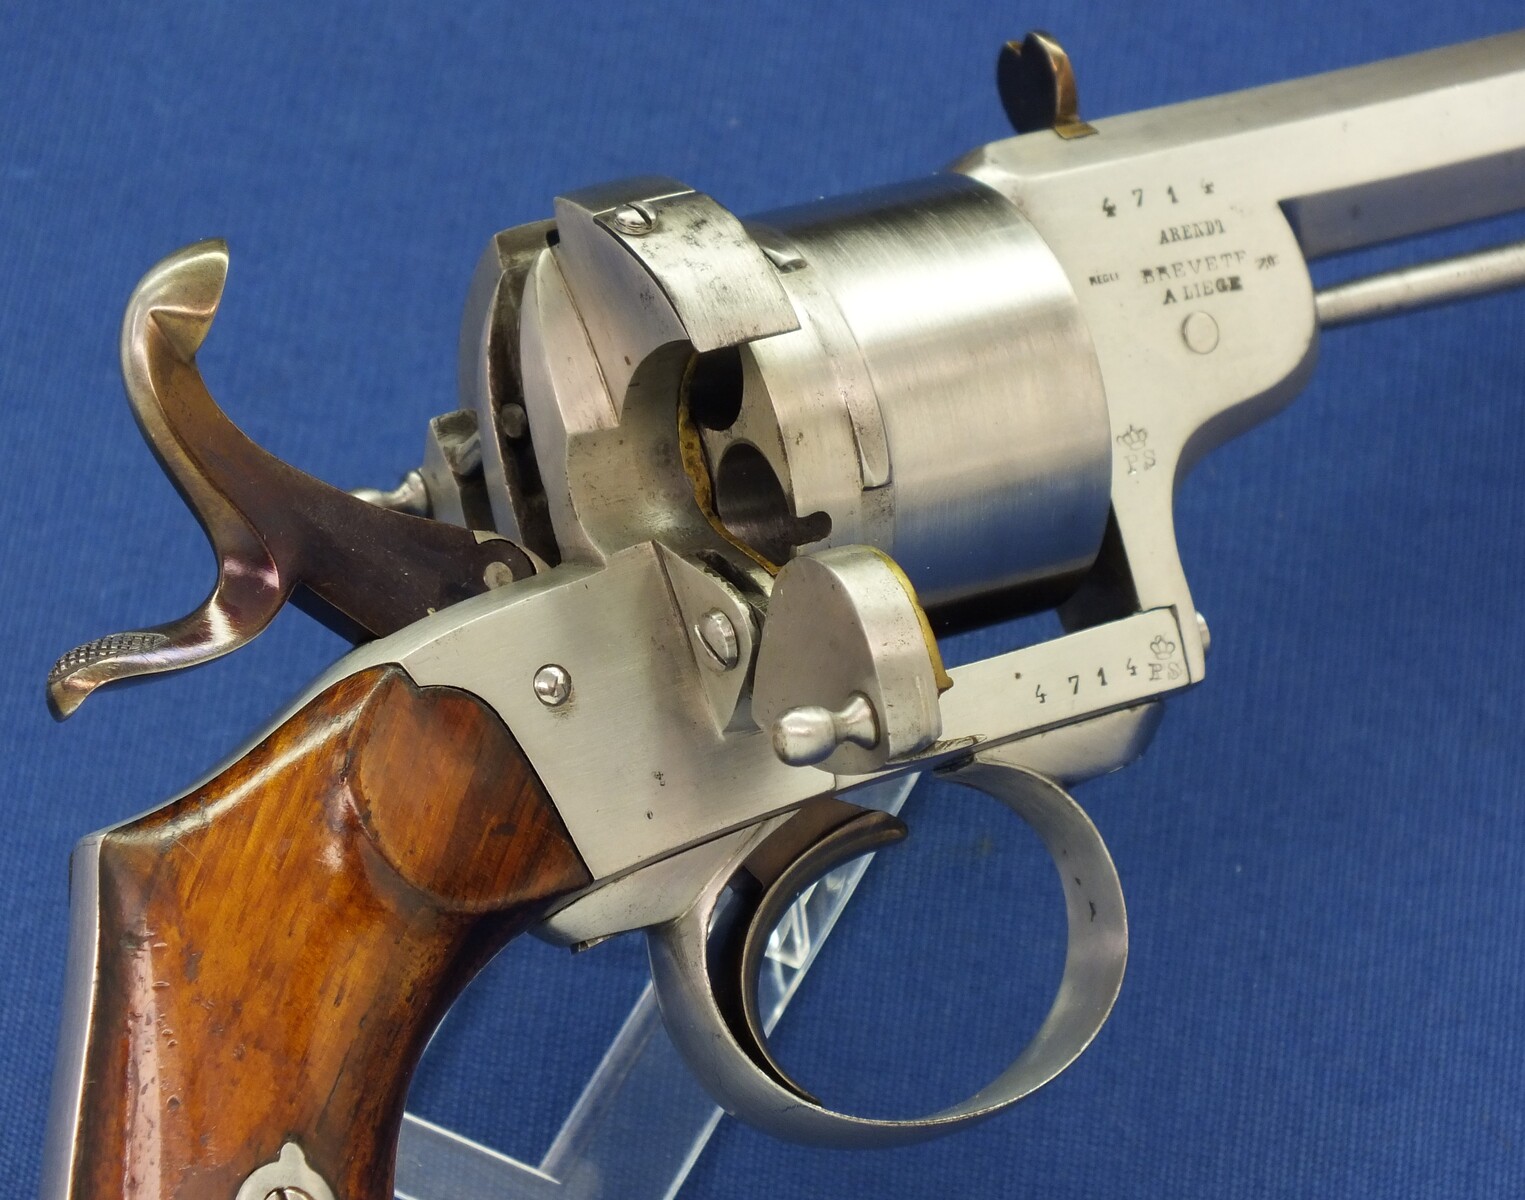 An Antique Dutch Officers Arendt Brevete Liege 6 shot Double and Single Action 12mm Pinfire Revolver Inspected by P. Stevens Maastricht. Lenght 30cm. In very good condition. Price 1.550 euro